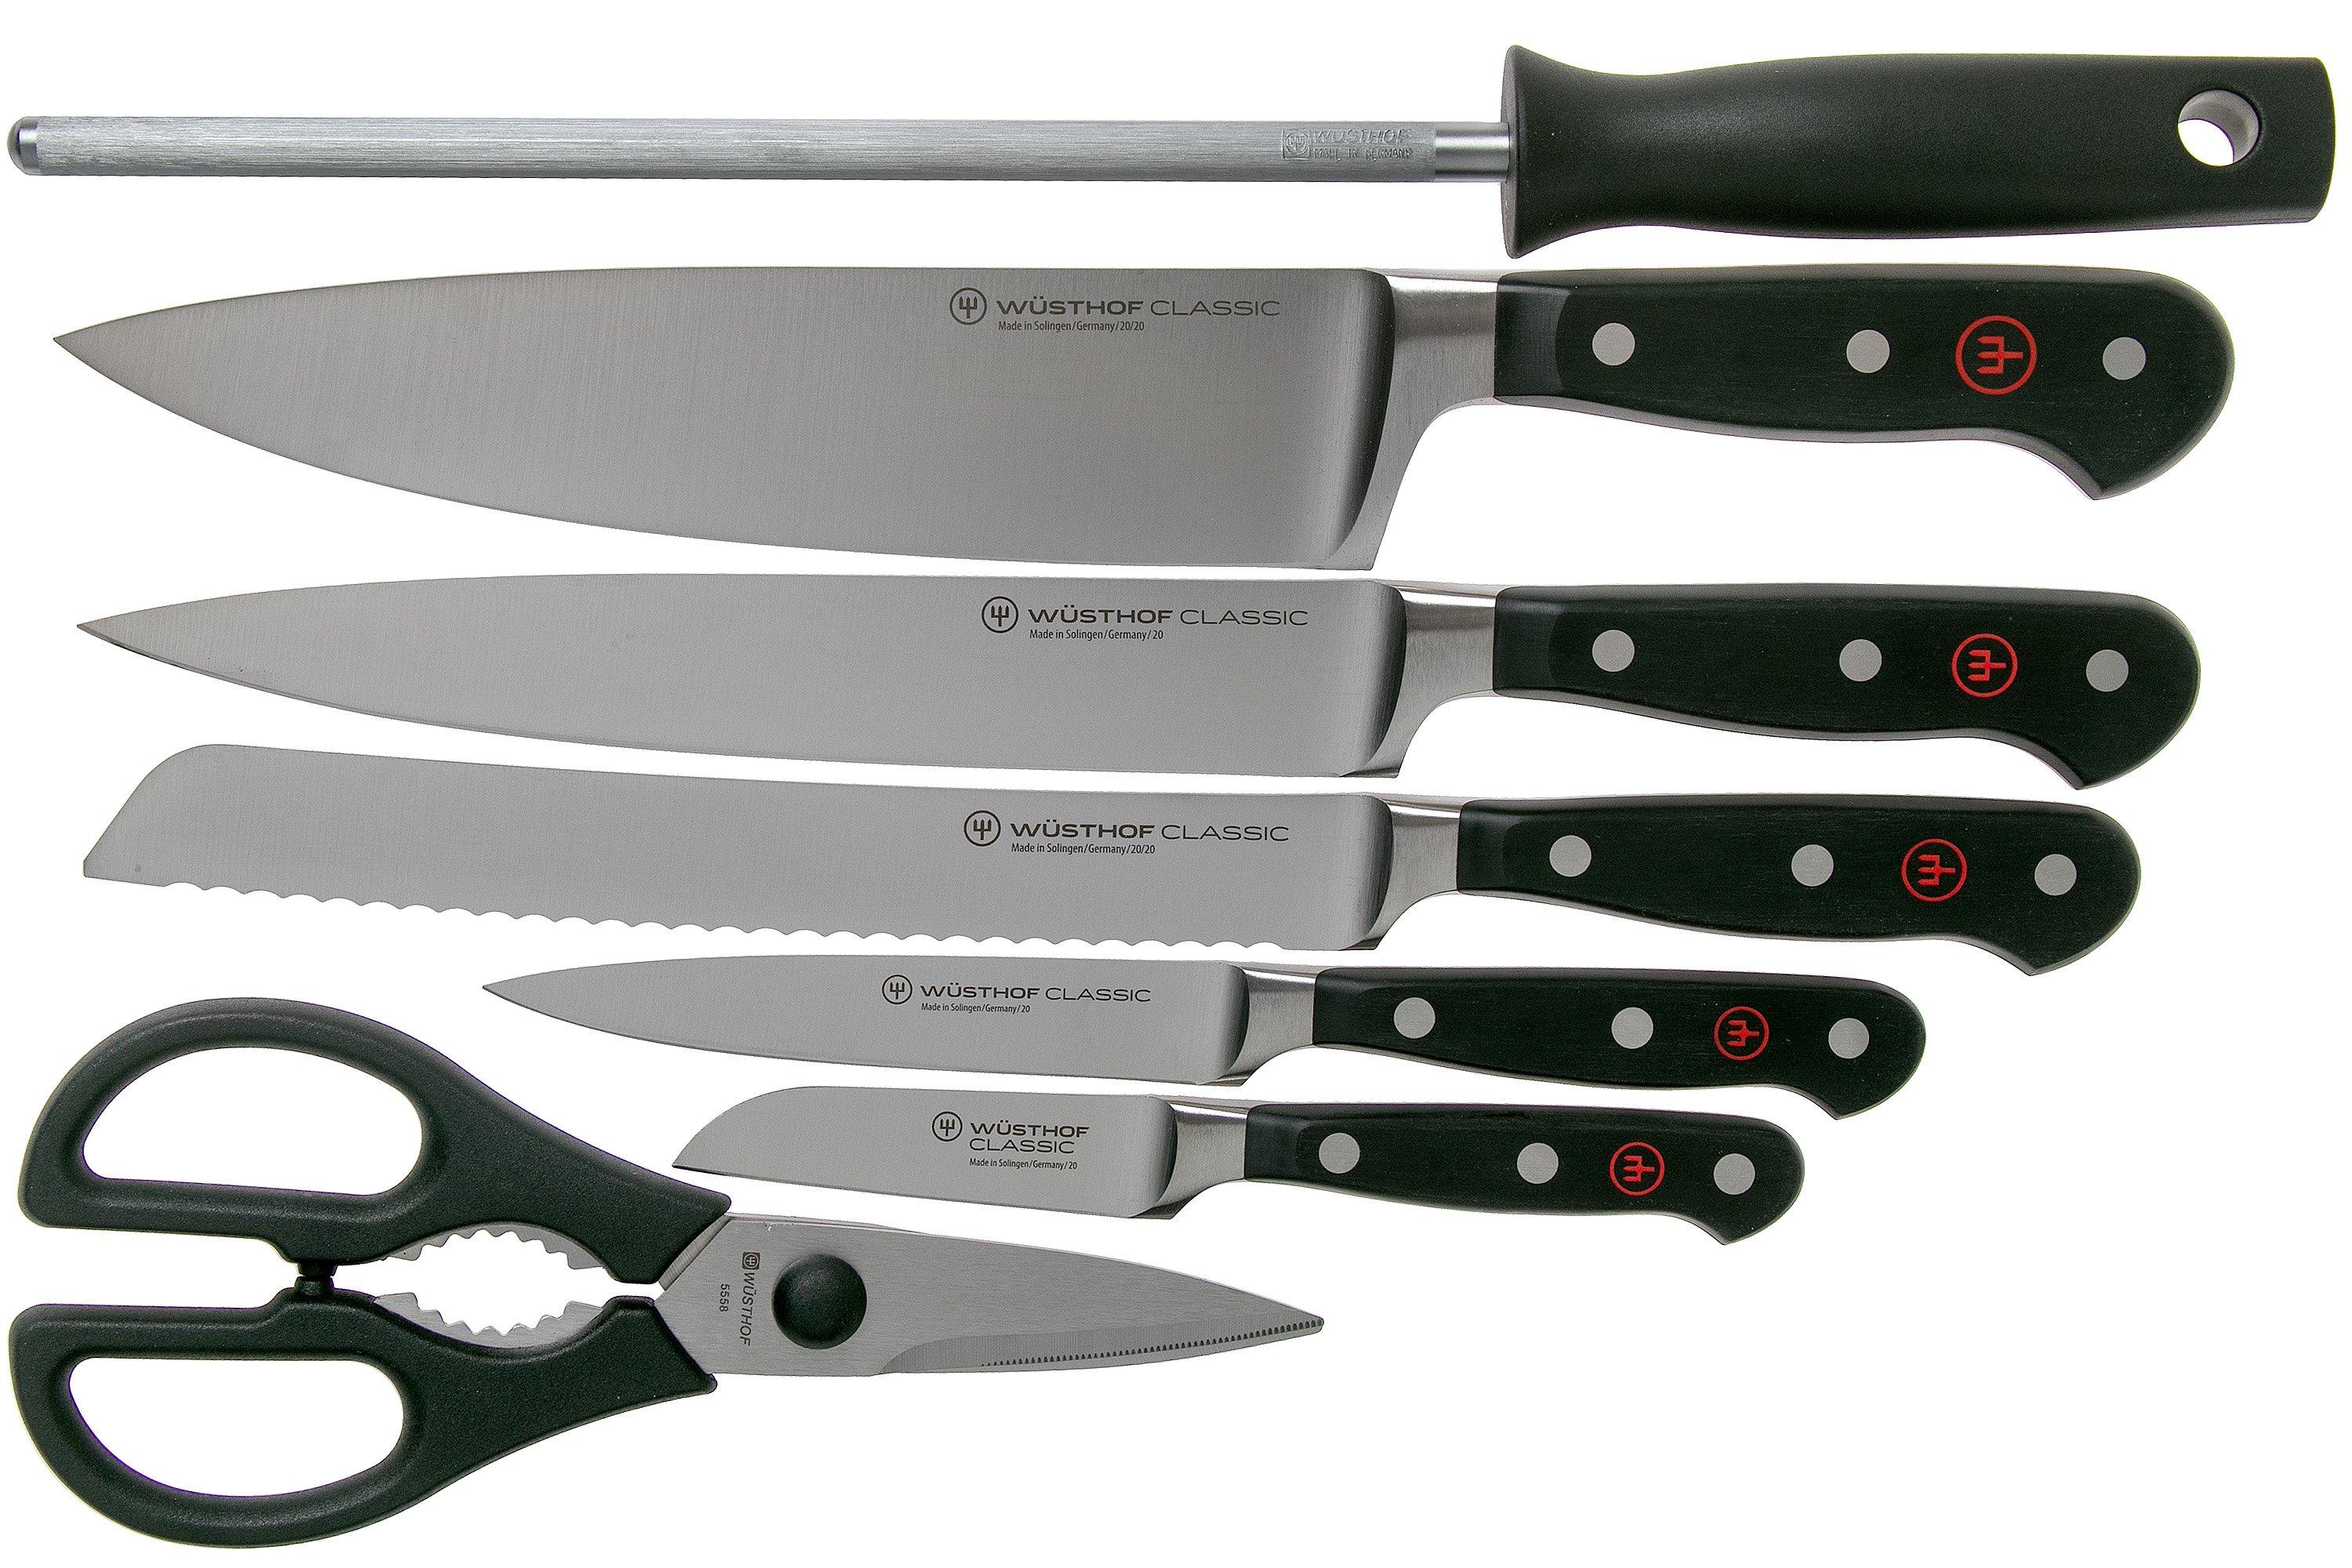 BERGHOFF Worldwide German Made 15-Pcs Knife Set With Knife Block () for  sale online